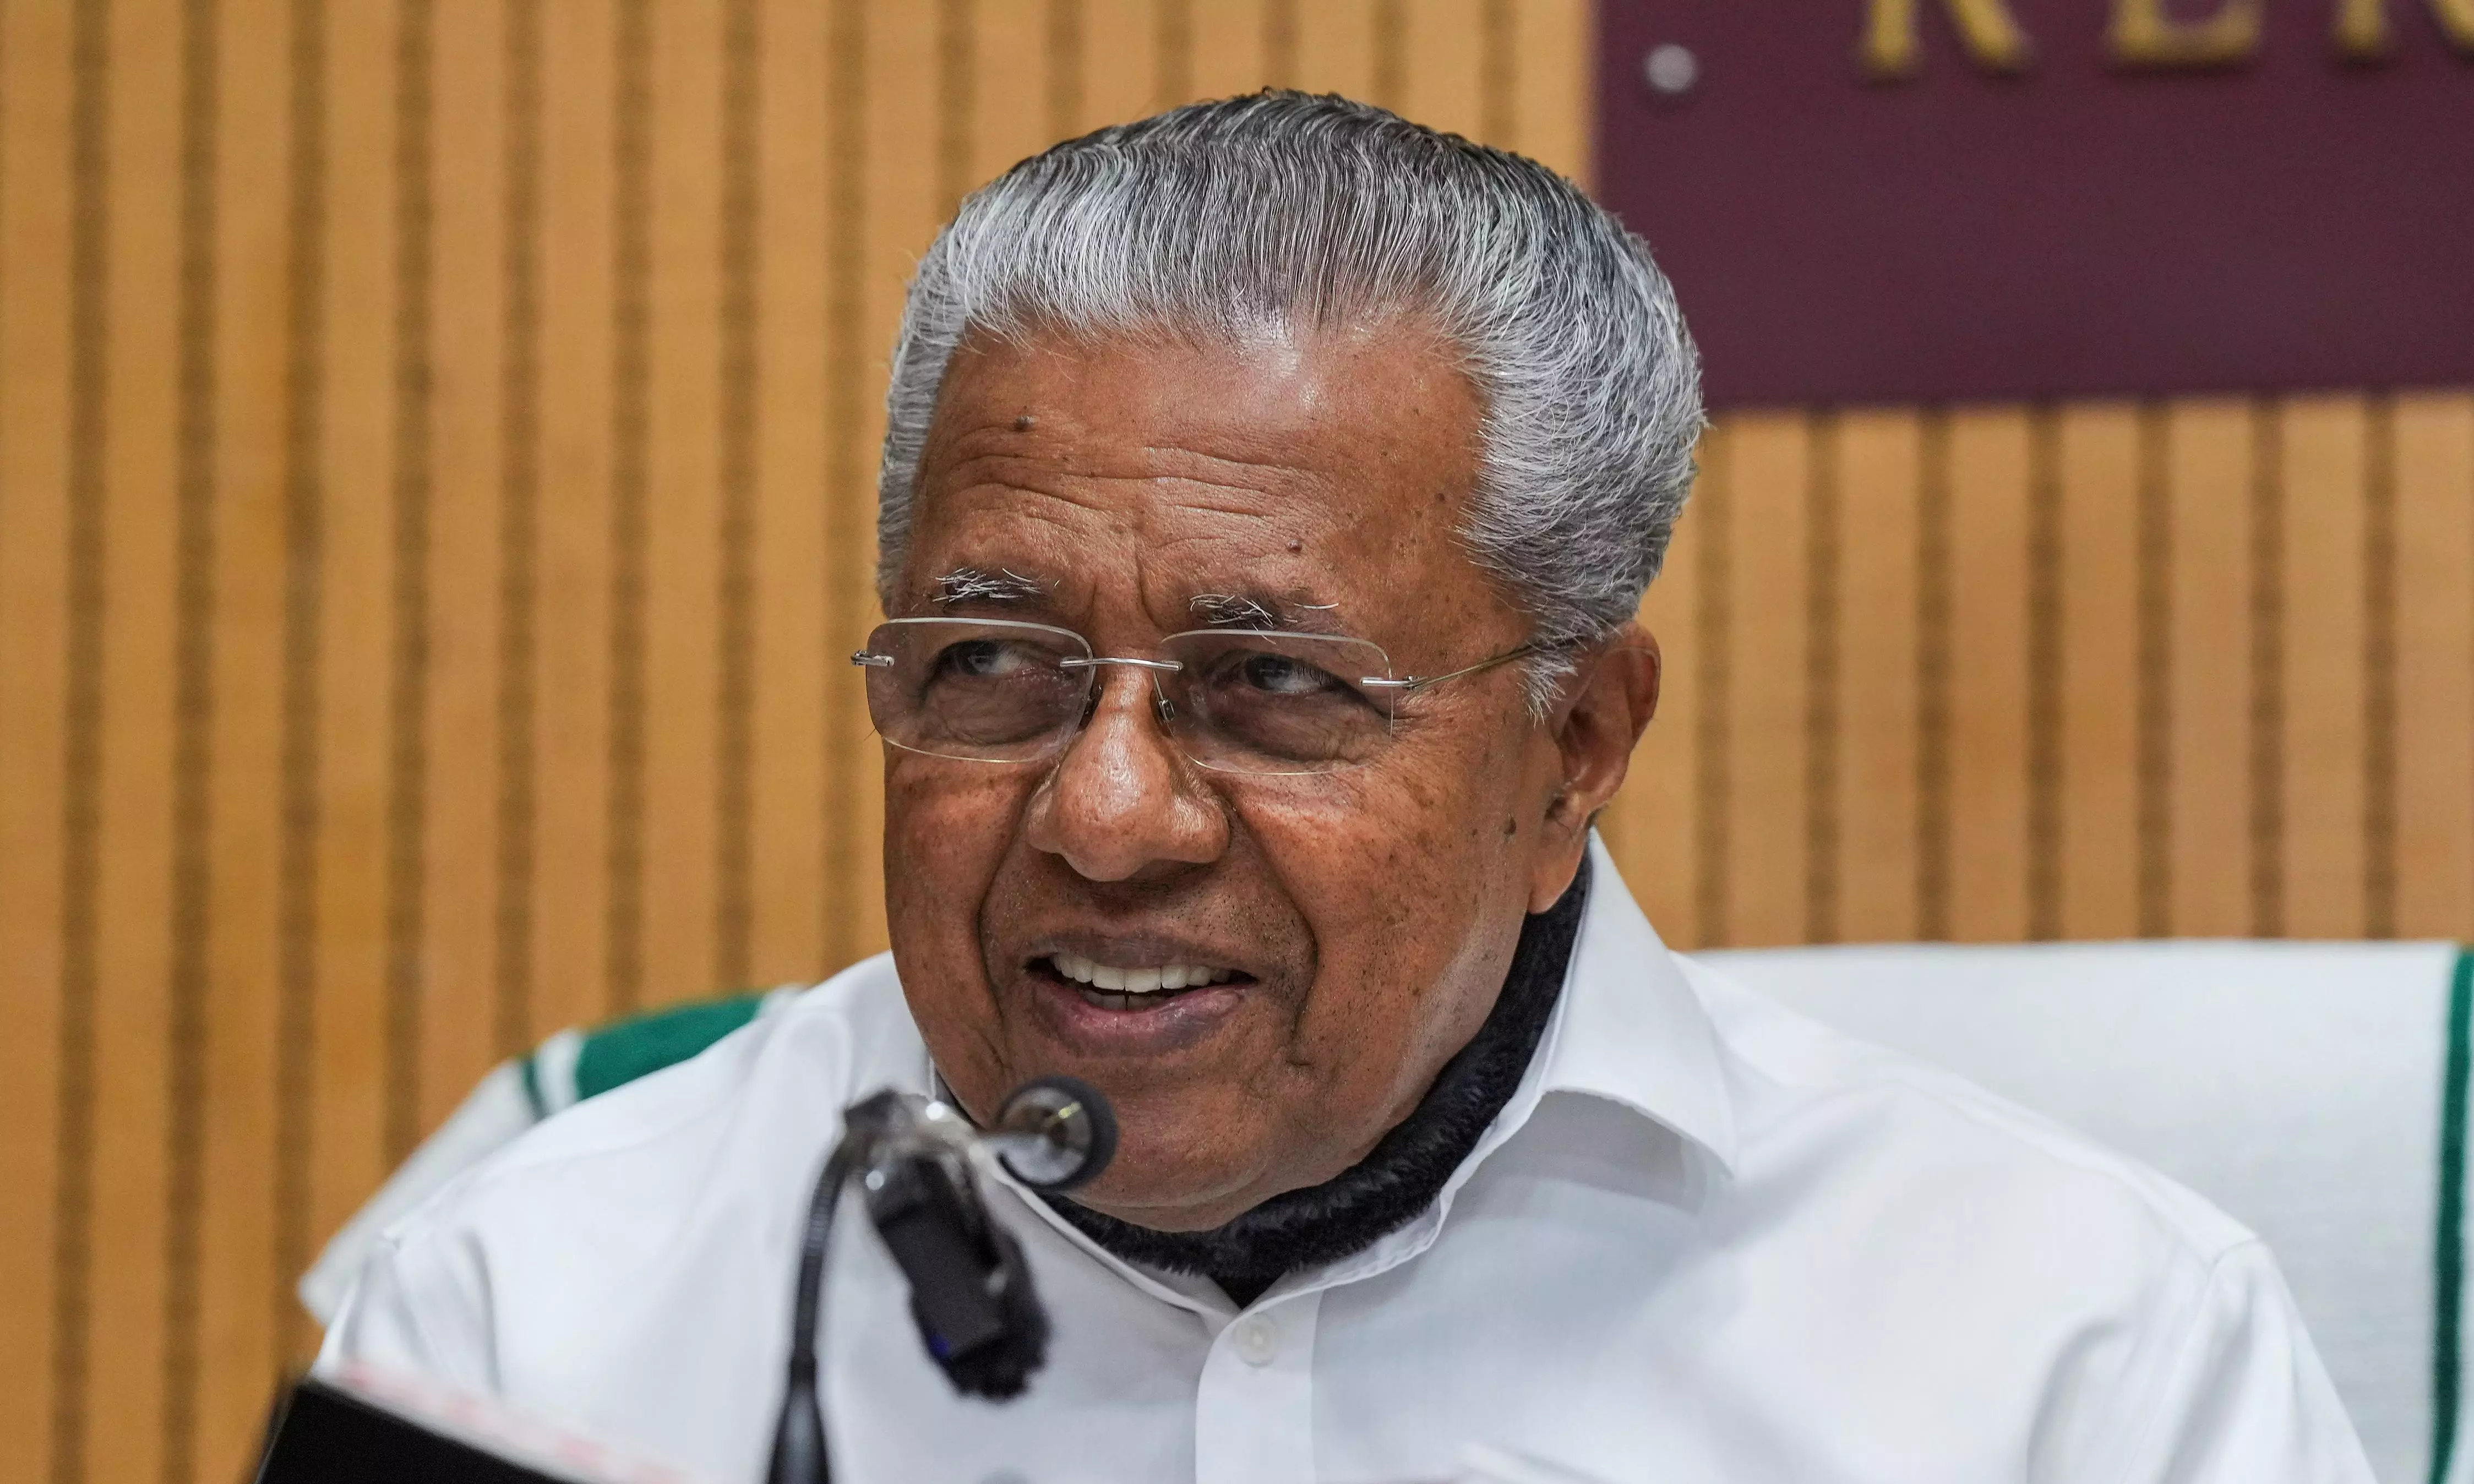 Centres actions have weakened cooperative federalism: Pinarayi